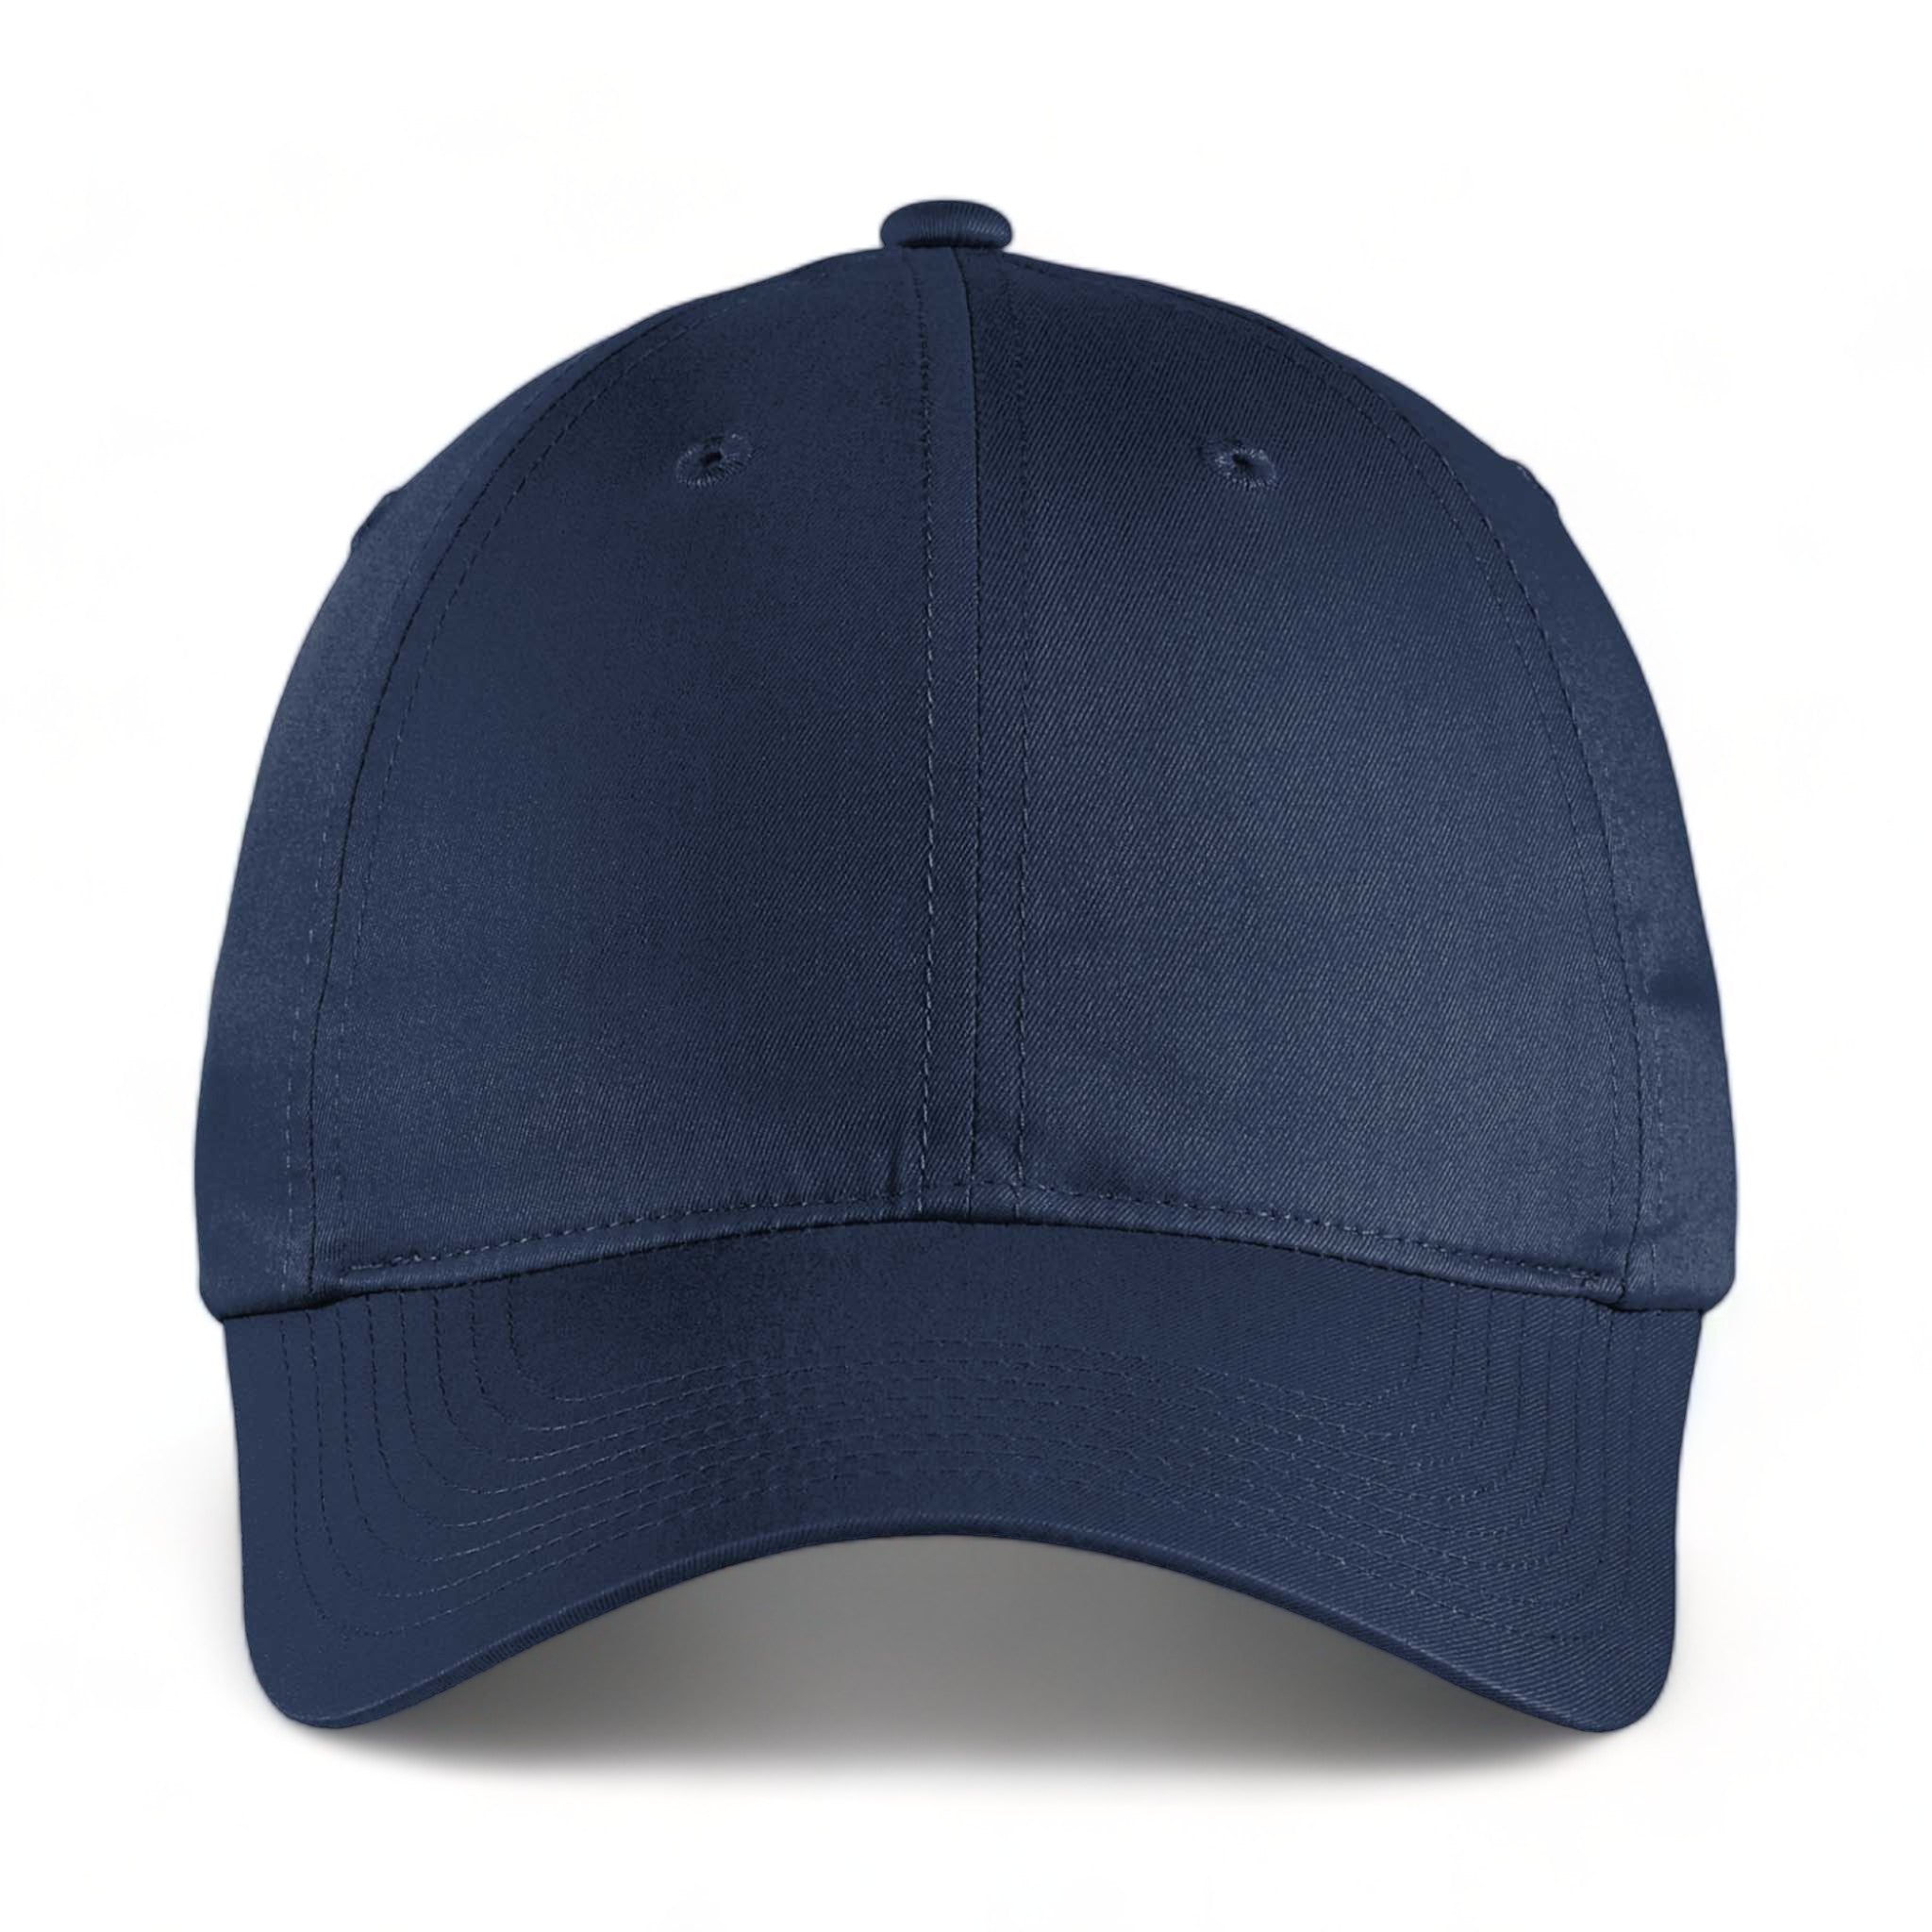 Front view of Nike NKFB6449 custom hat in navy